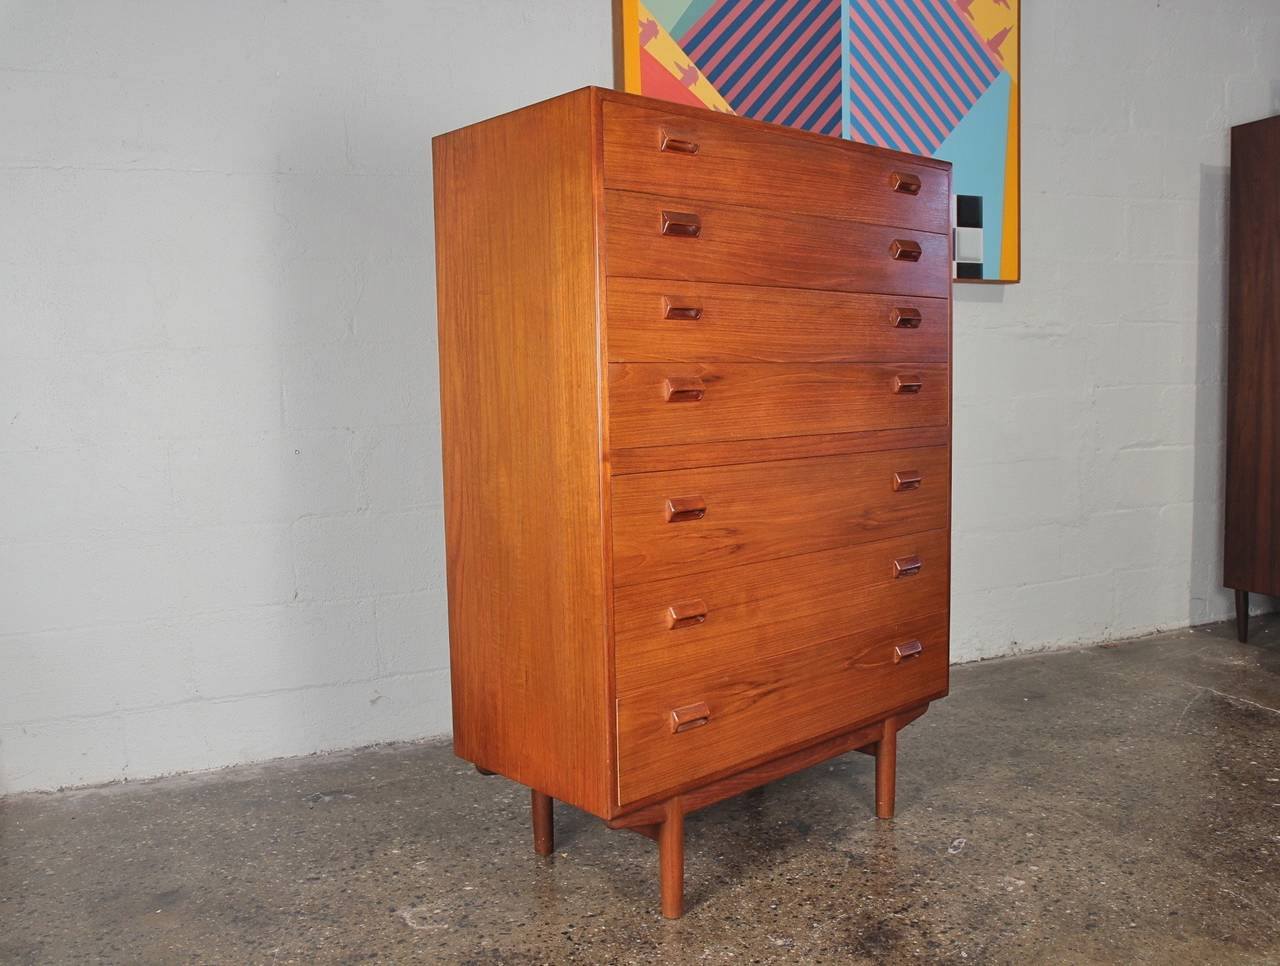 Lovely Danish modern teak tallboy dresser. This large-scale piece has abundant storage in its seven drawers. We have additional matching storage pieces that form a suite: a vanity and a four-drawer dresser. Designed by Borge Mogensen. Povl Dinesen